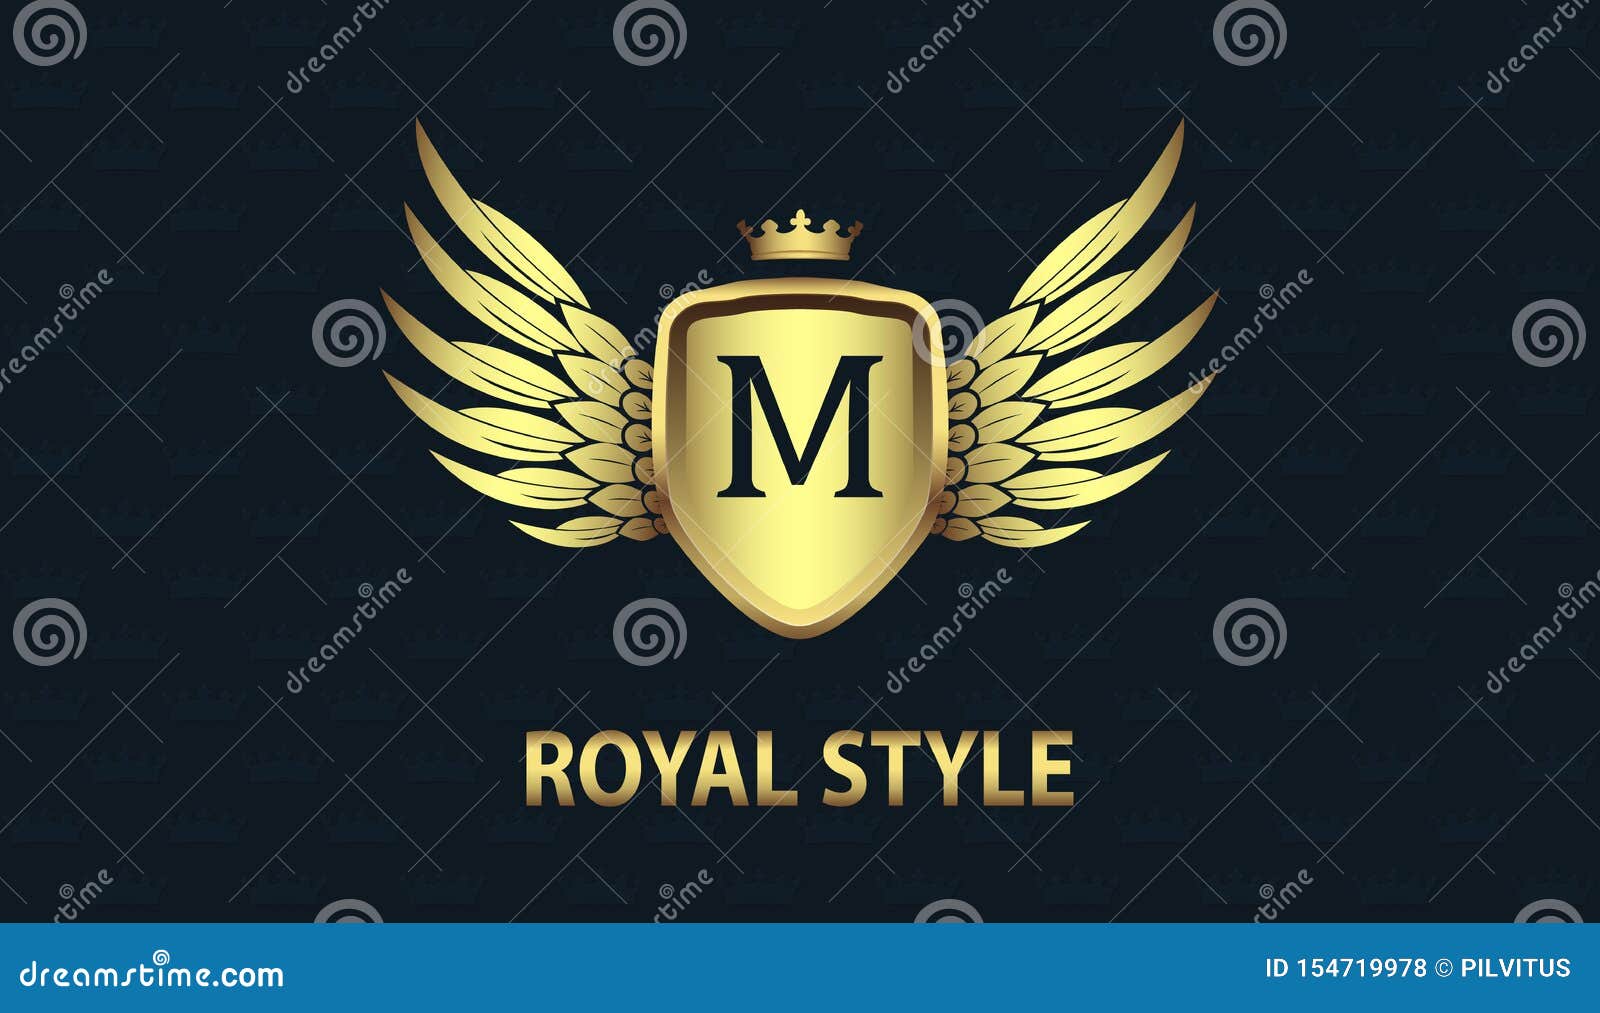 Stylish Gold Shield with Wings, Crown and Initial Letter M ...